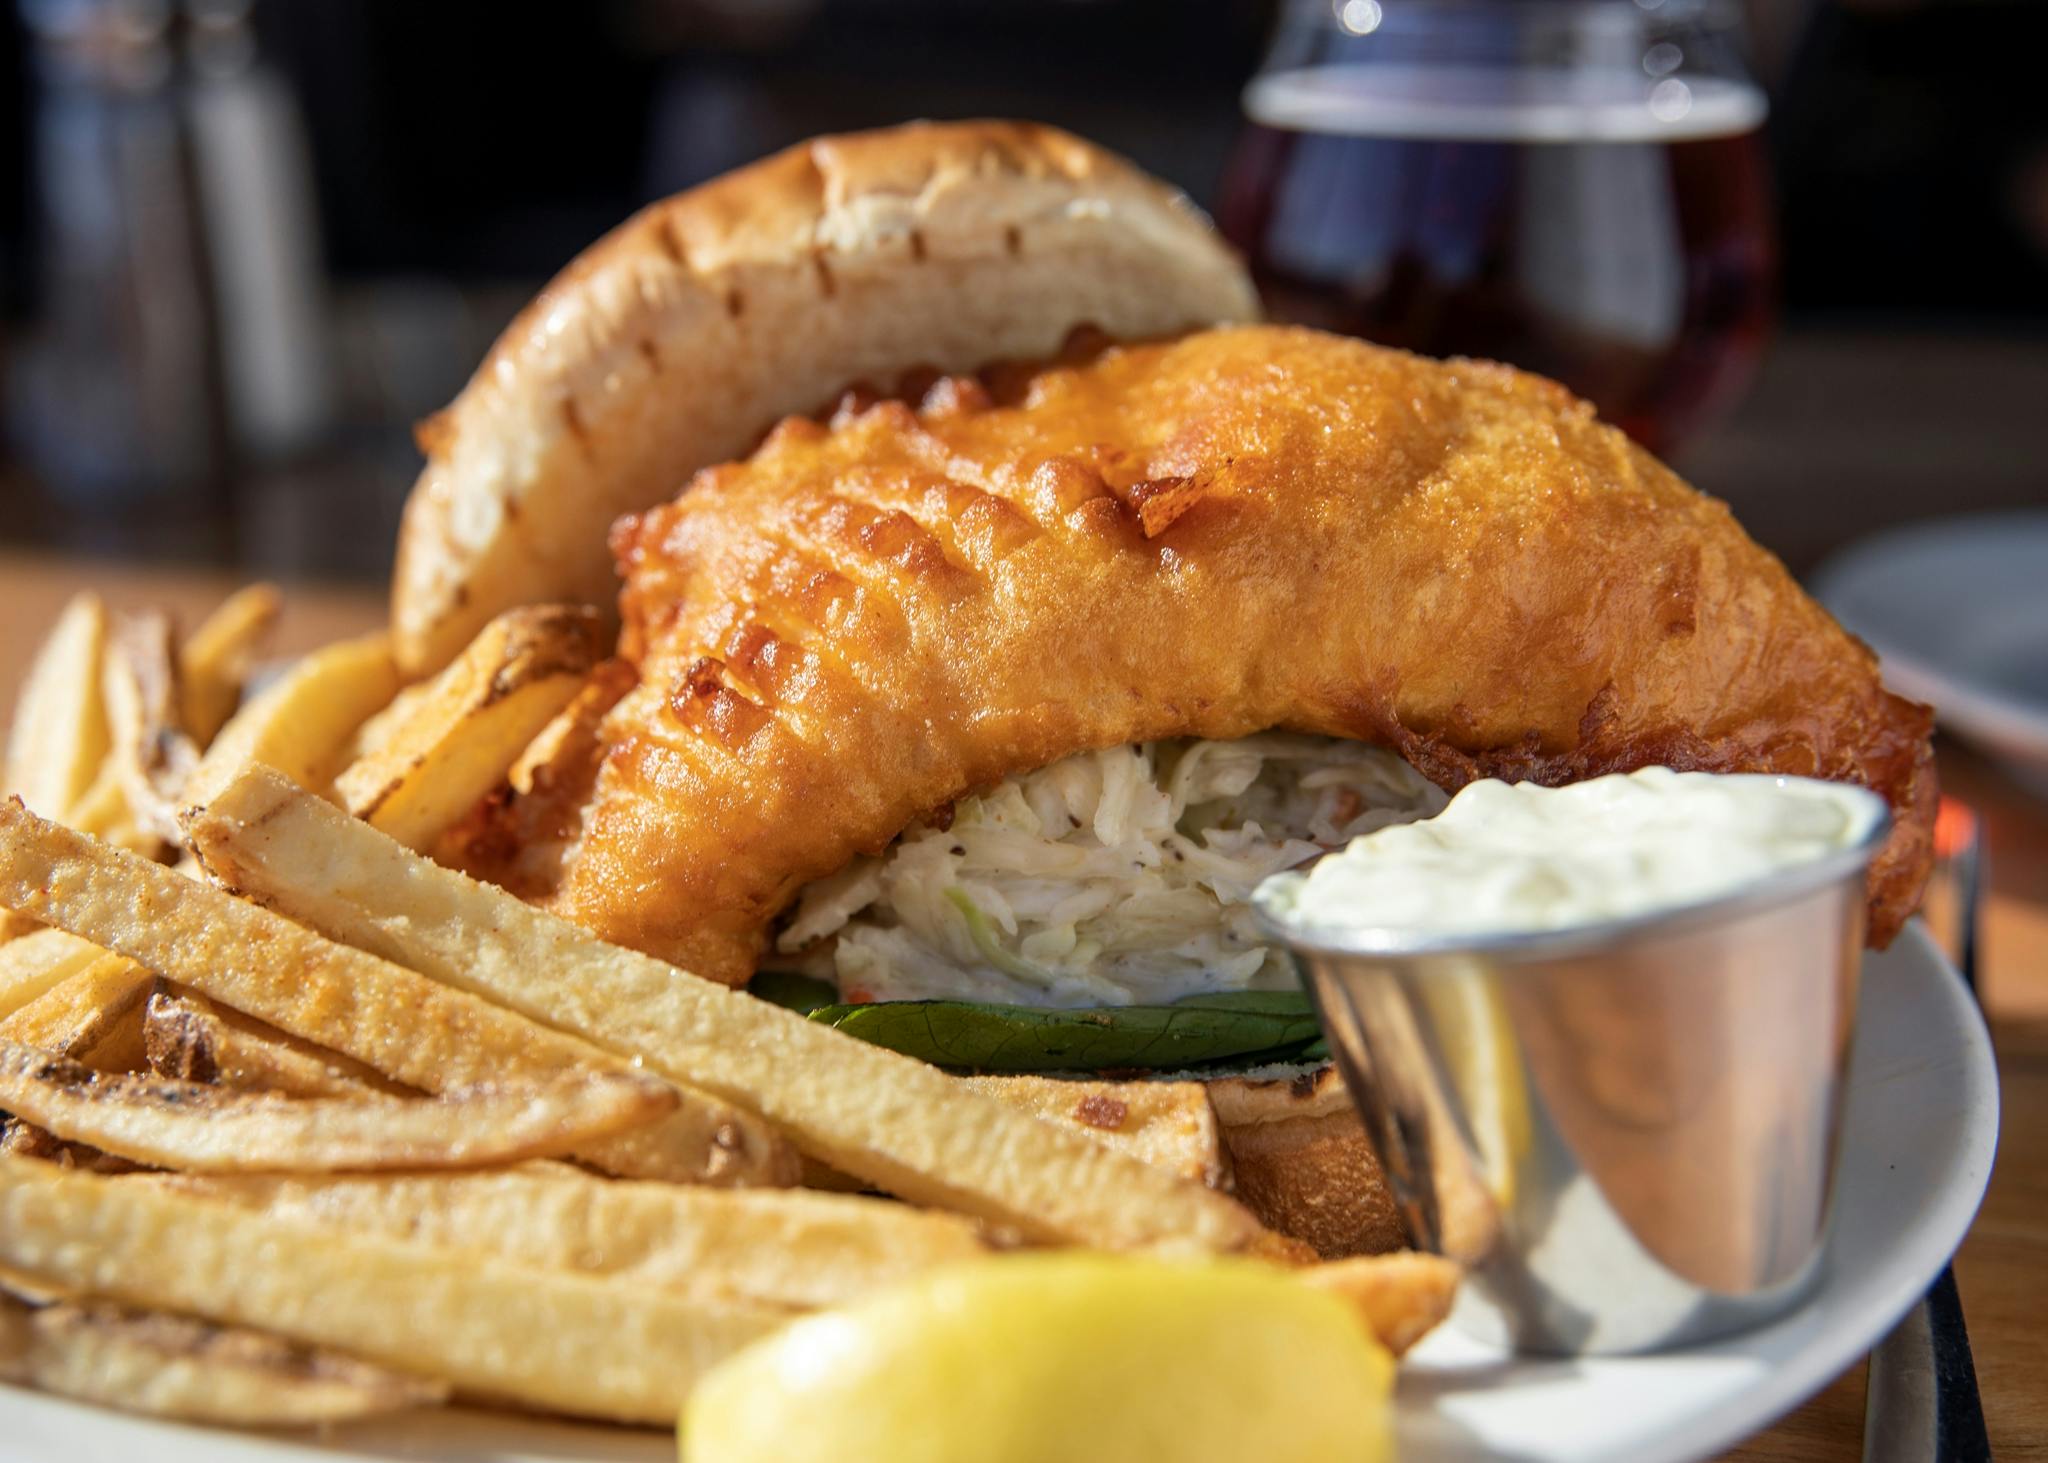 Beer Battered Haddock Sandwich from Becket's in Oshkosh, WI